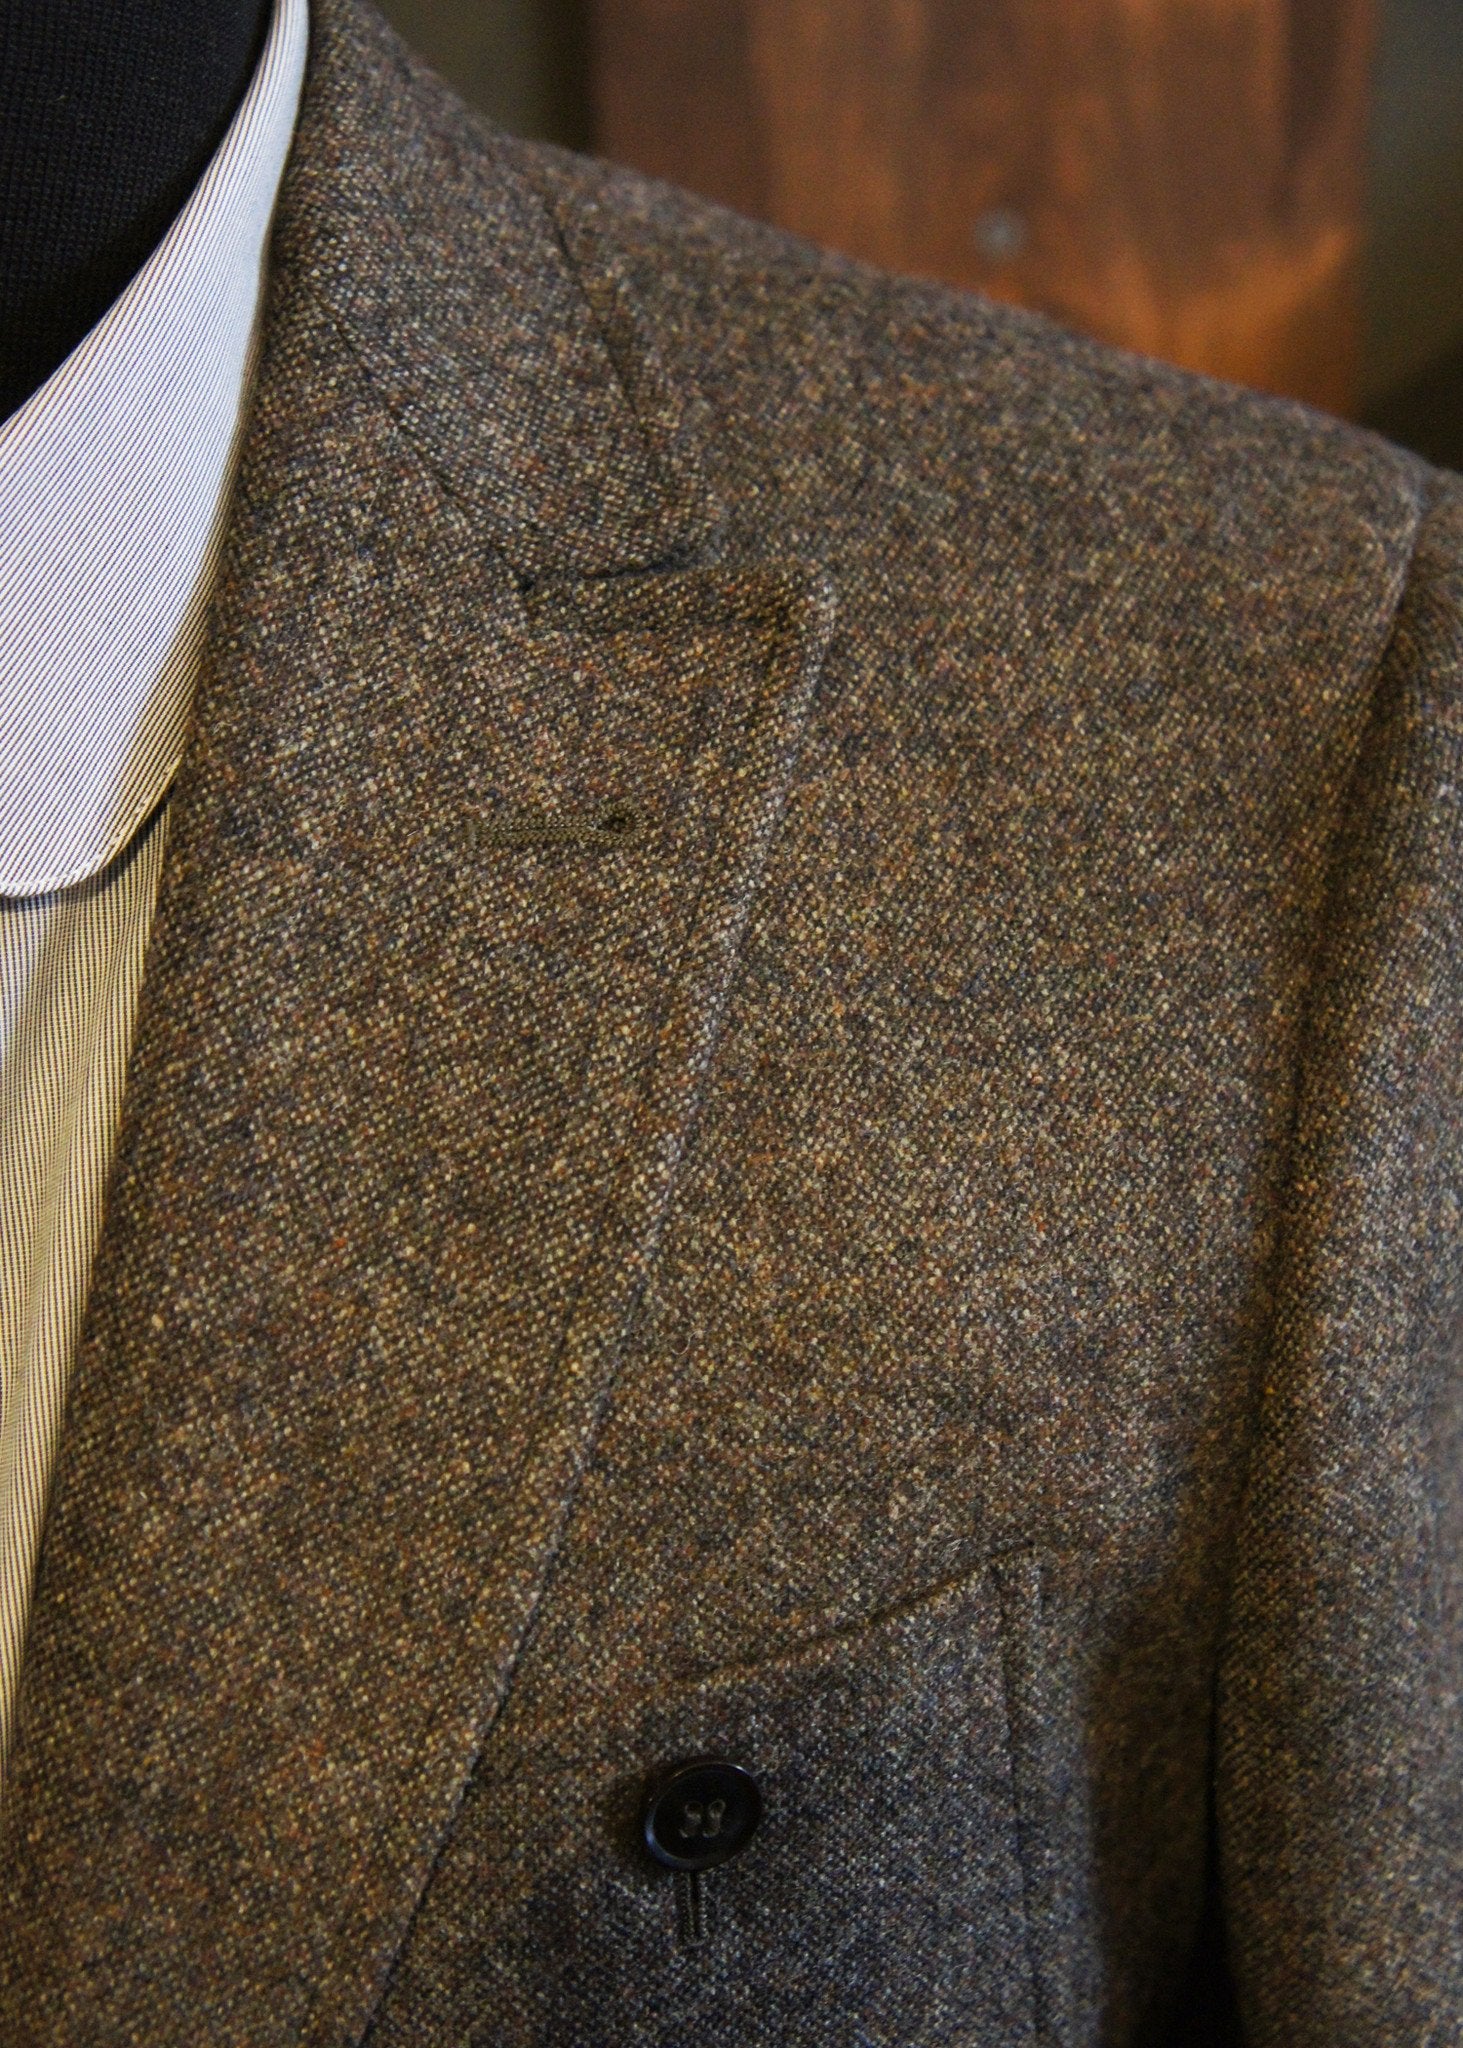 Derby Tweed Suit-Bykowski Tailor & Garb English Tweed sack coat peaky blinders prohibition semi peak lapel tailored fit slim fit Wool heritage clothing Gatsby Edwardian Dapper Classic Casual 1930's 1920's 1910's vintage inspired tweed Rustic Made in USA Handcrafted